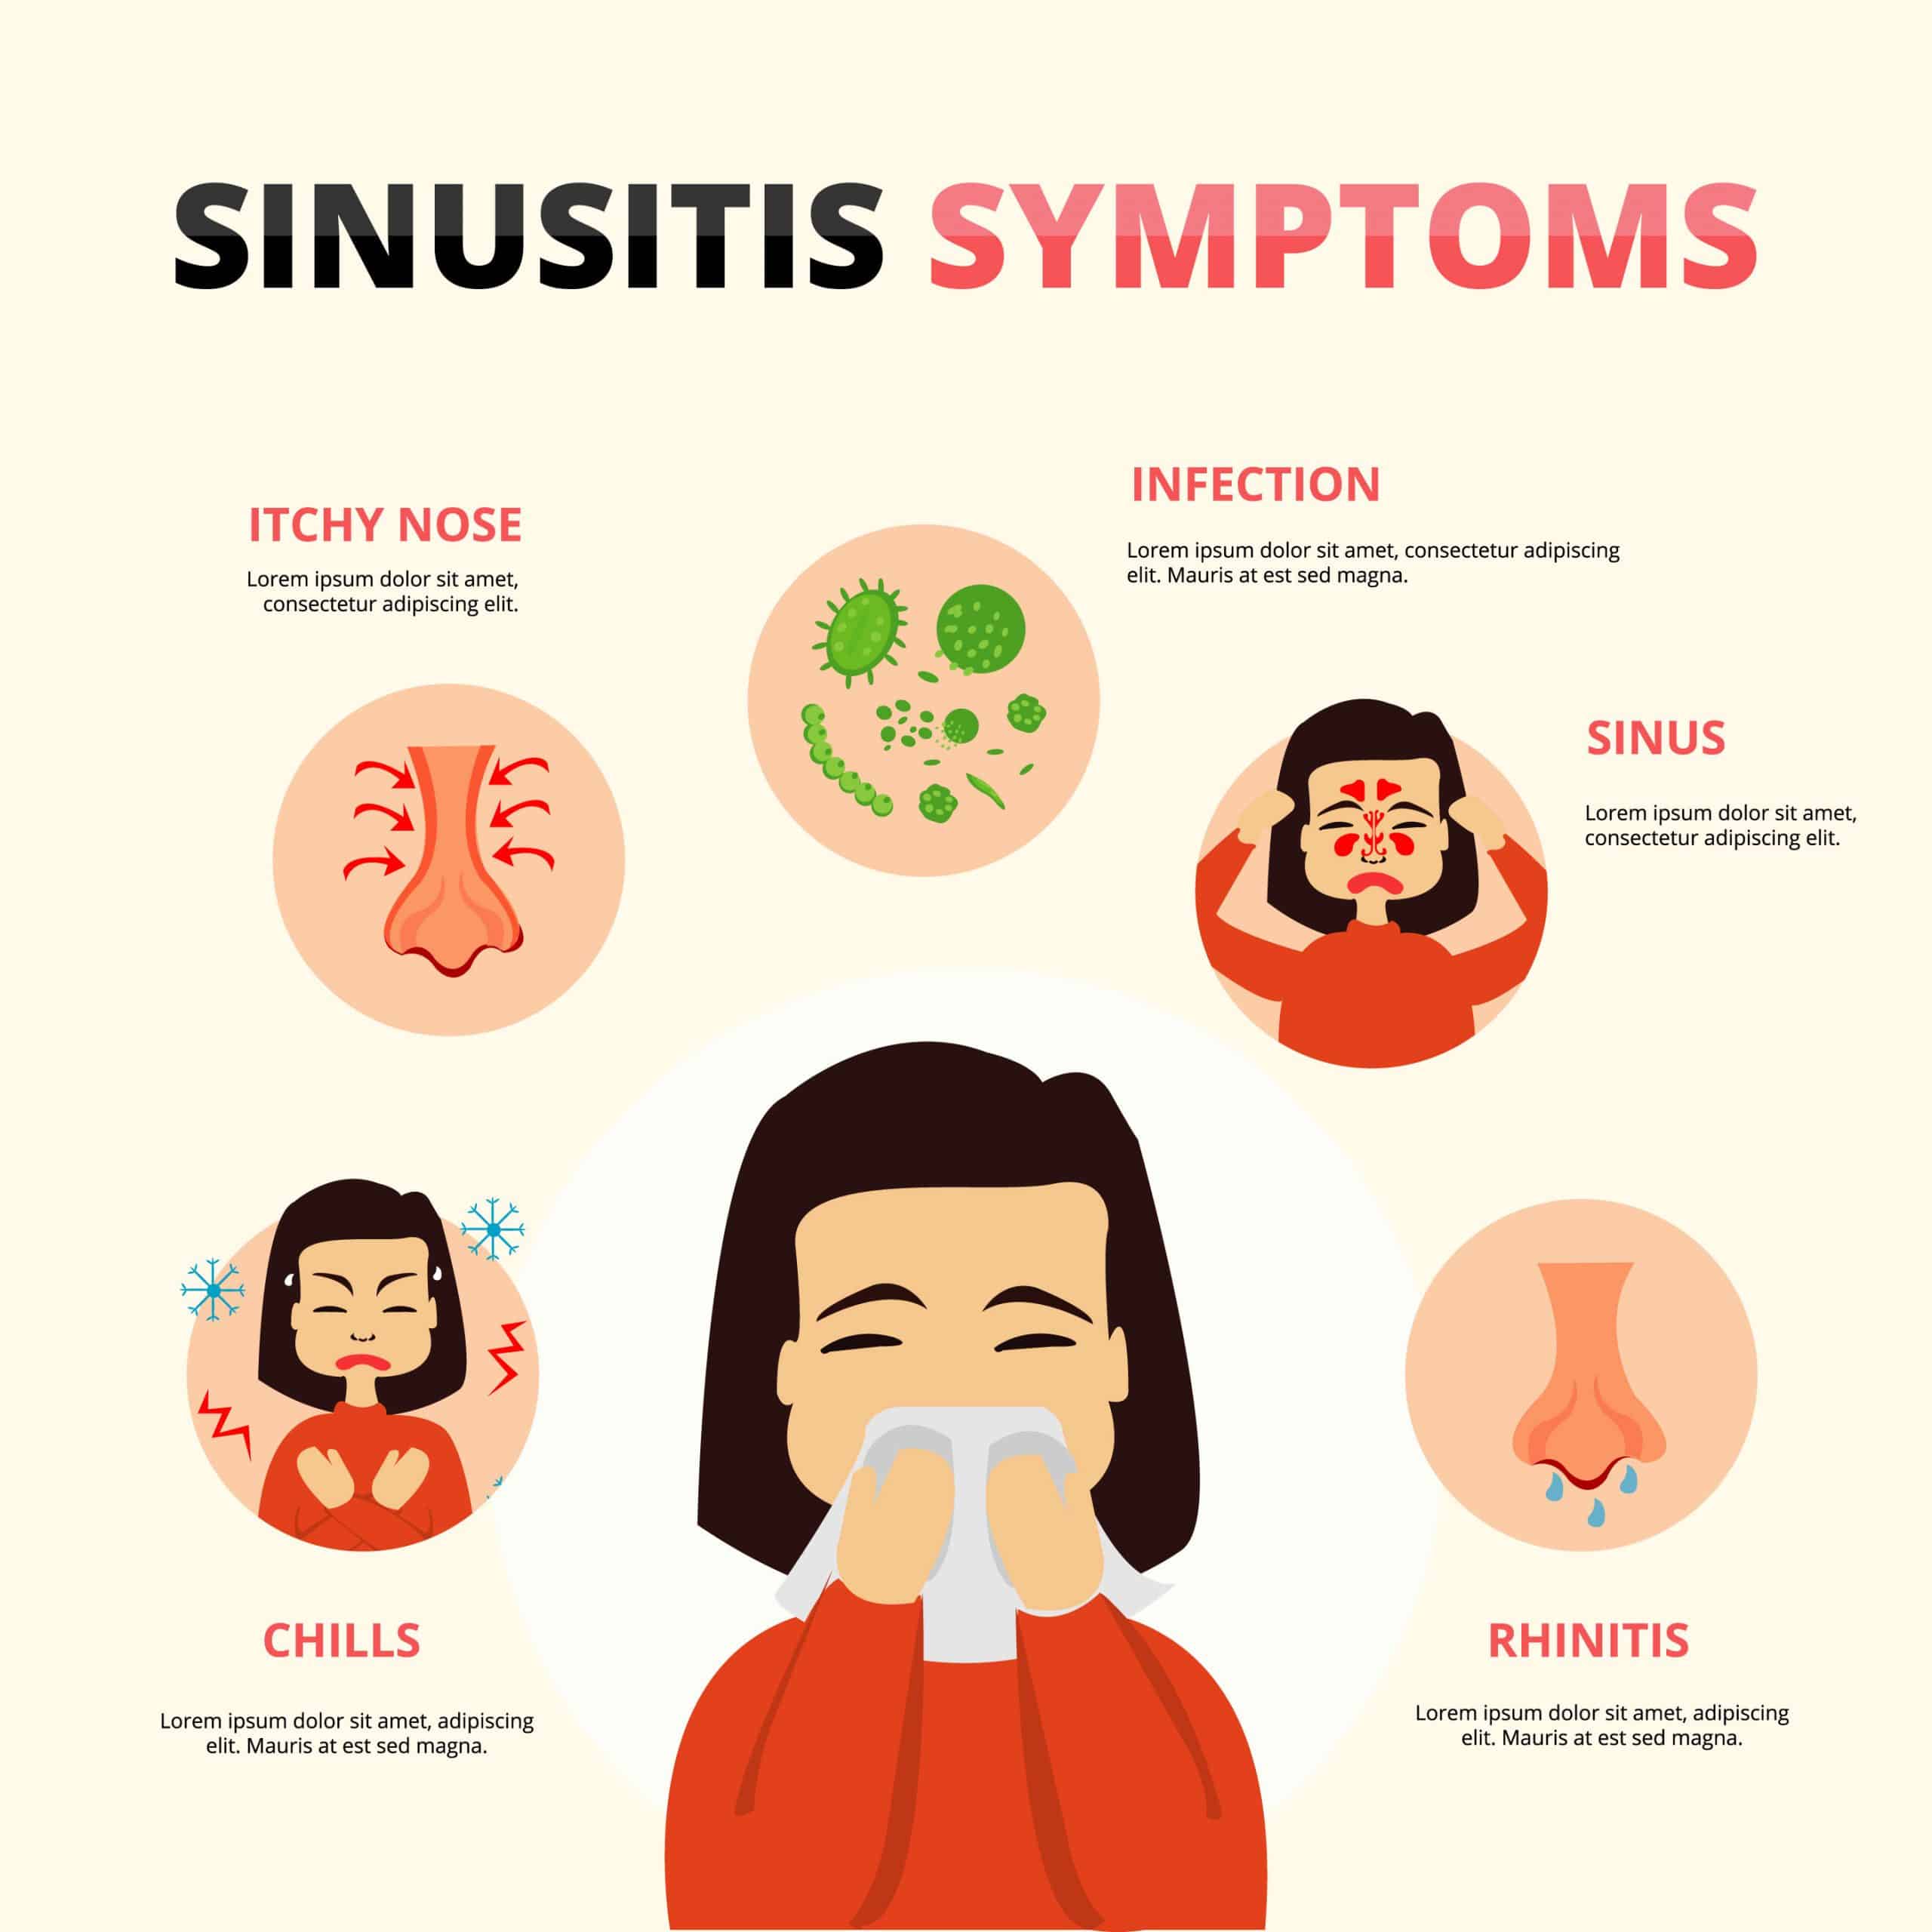 Everything That You Need to Know about Sinusitis